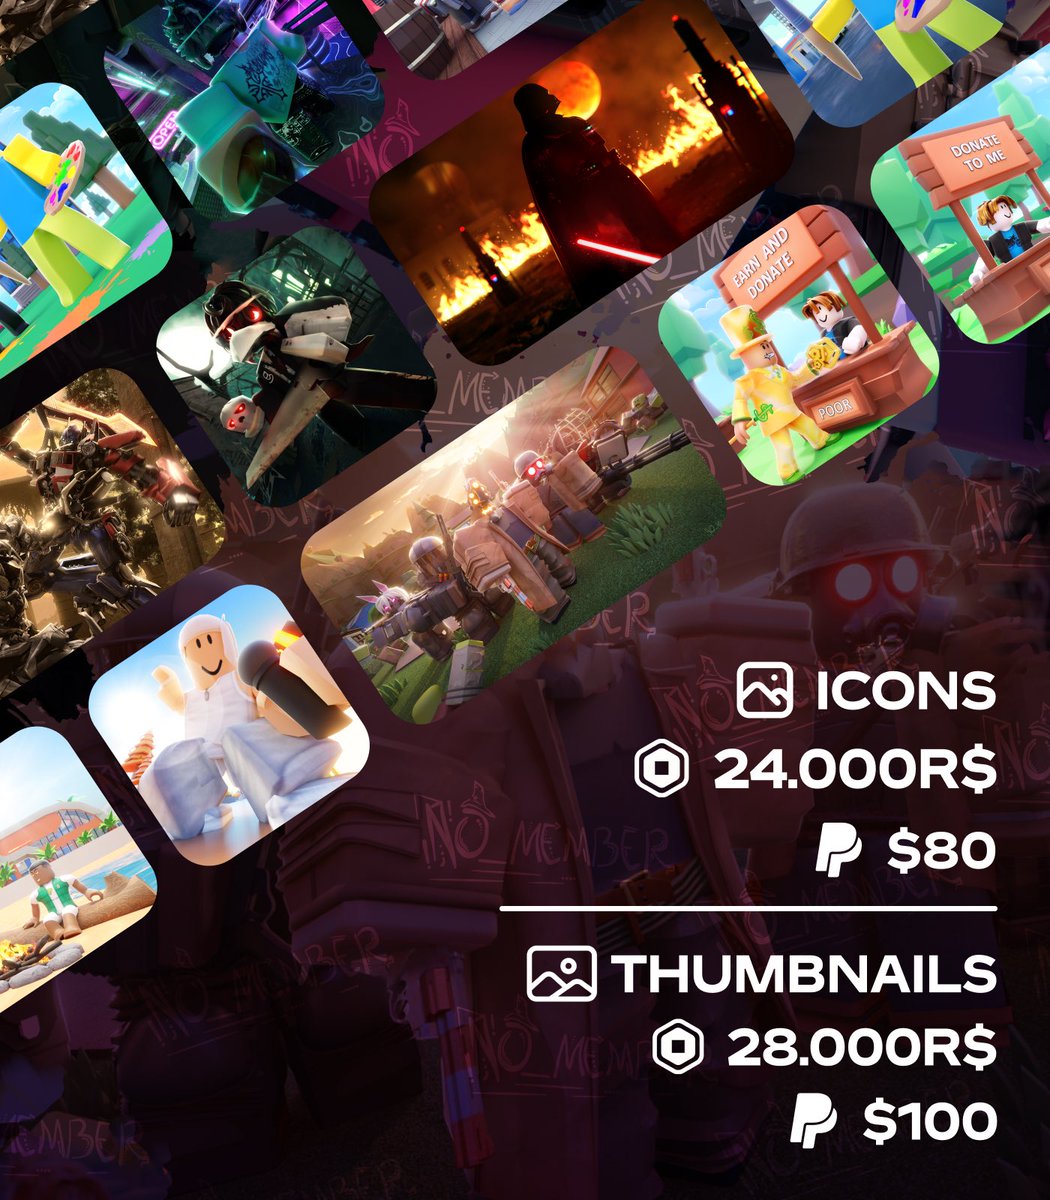 Hello World! 
‼️Here is New commissions sheet‼️
✔️Open✔️
#Roblox #RobloxDevs #RobloxGFX